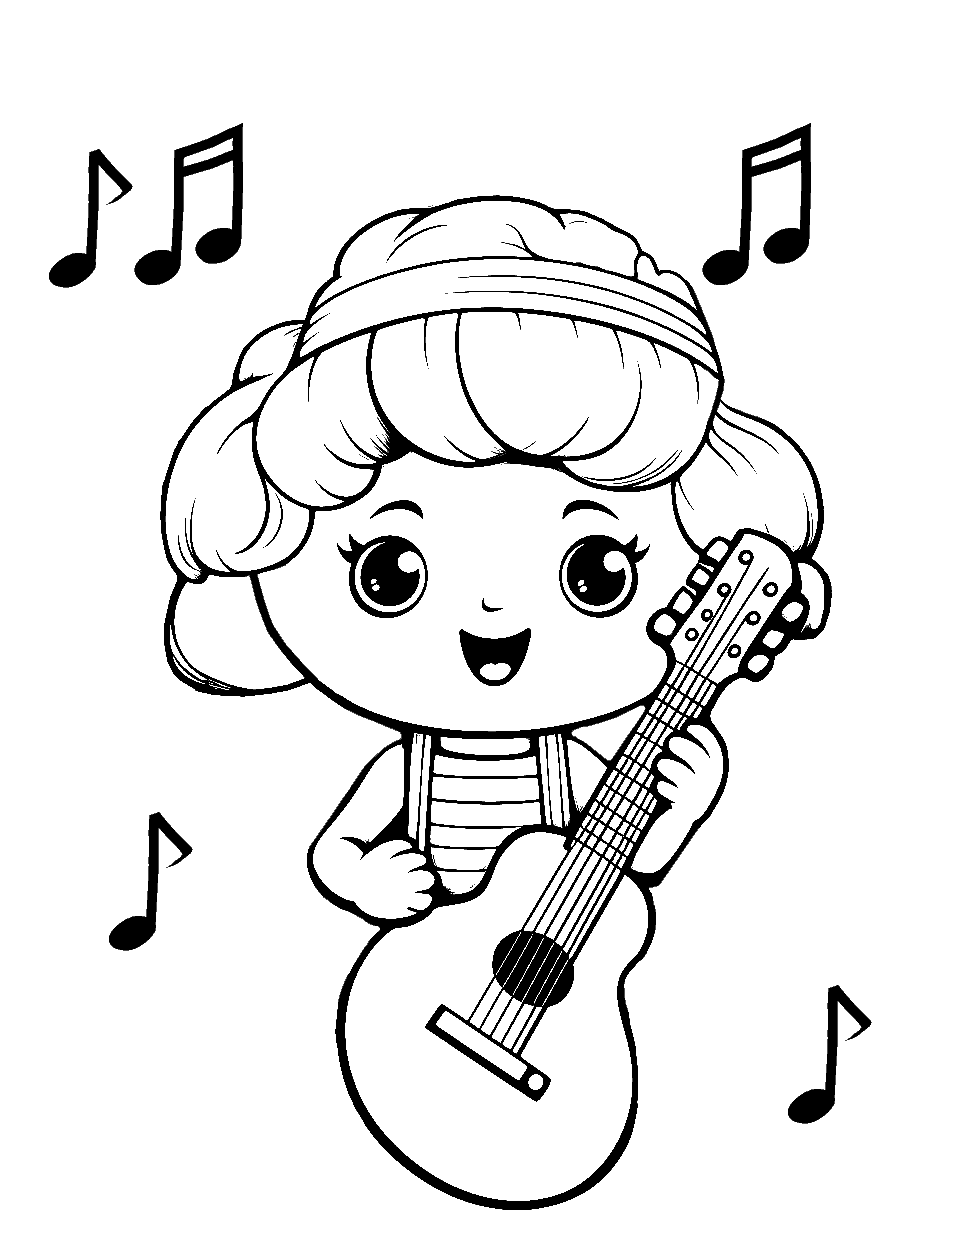 Musical Melody Session Coloring Page - Shopkin playing instruments, creating a harmonious tune.